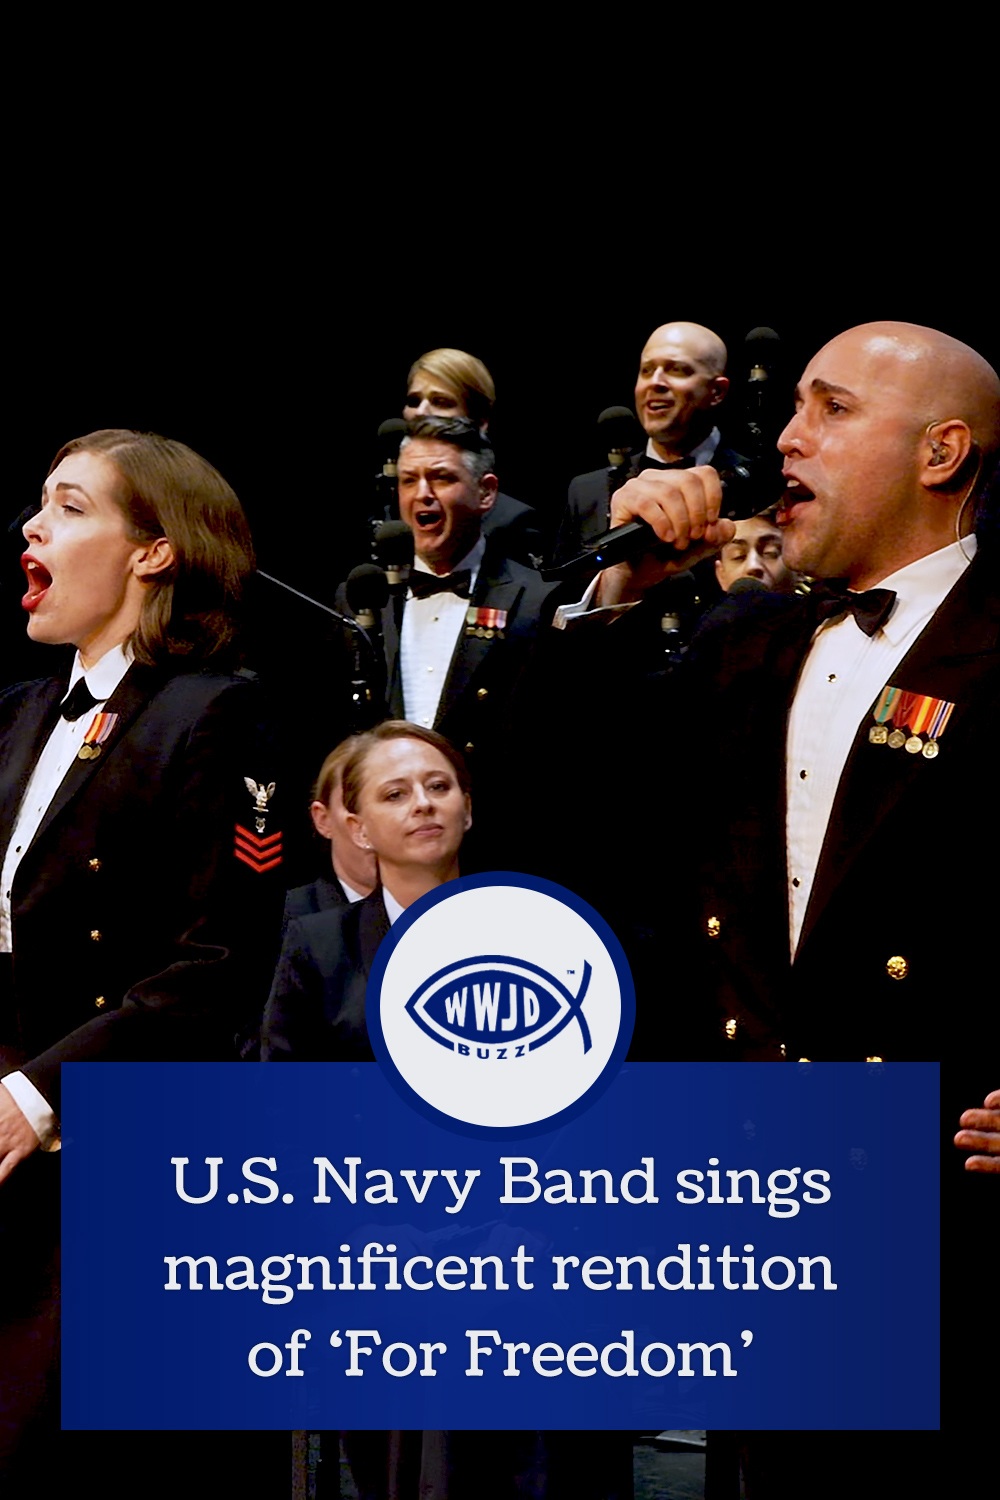 U.S. Navy Band sings magnificent rendition of ‘For Freedom’